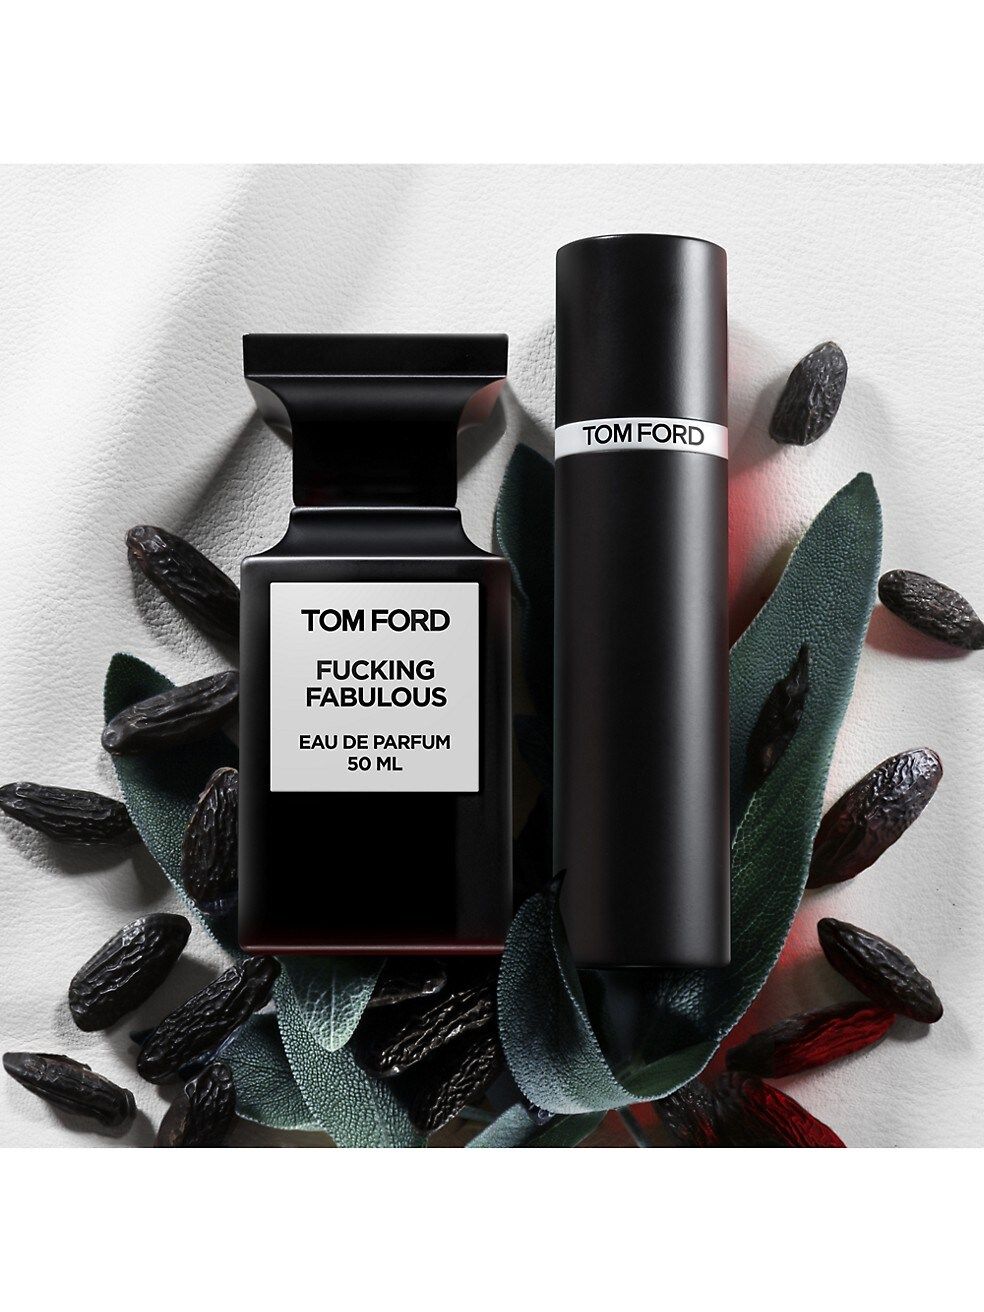 Tom Ford Fabulous Candle | Saks Fifth Avenue